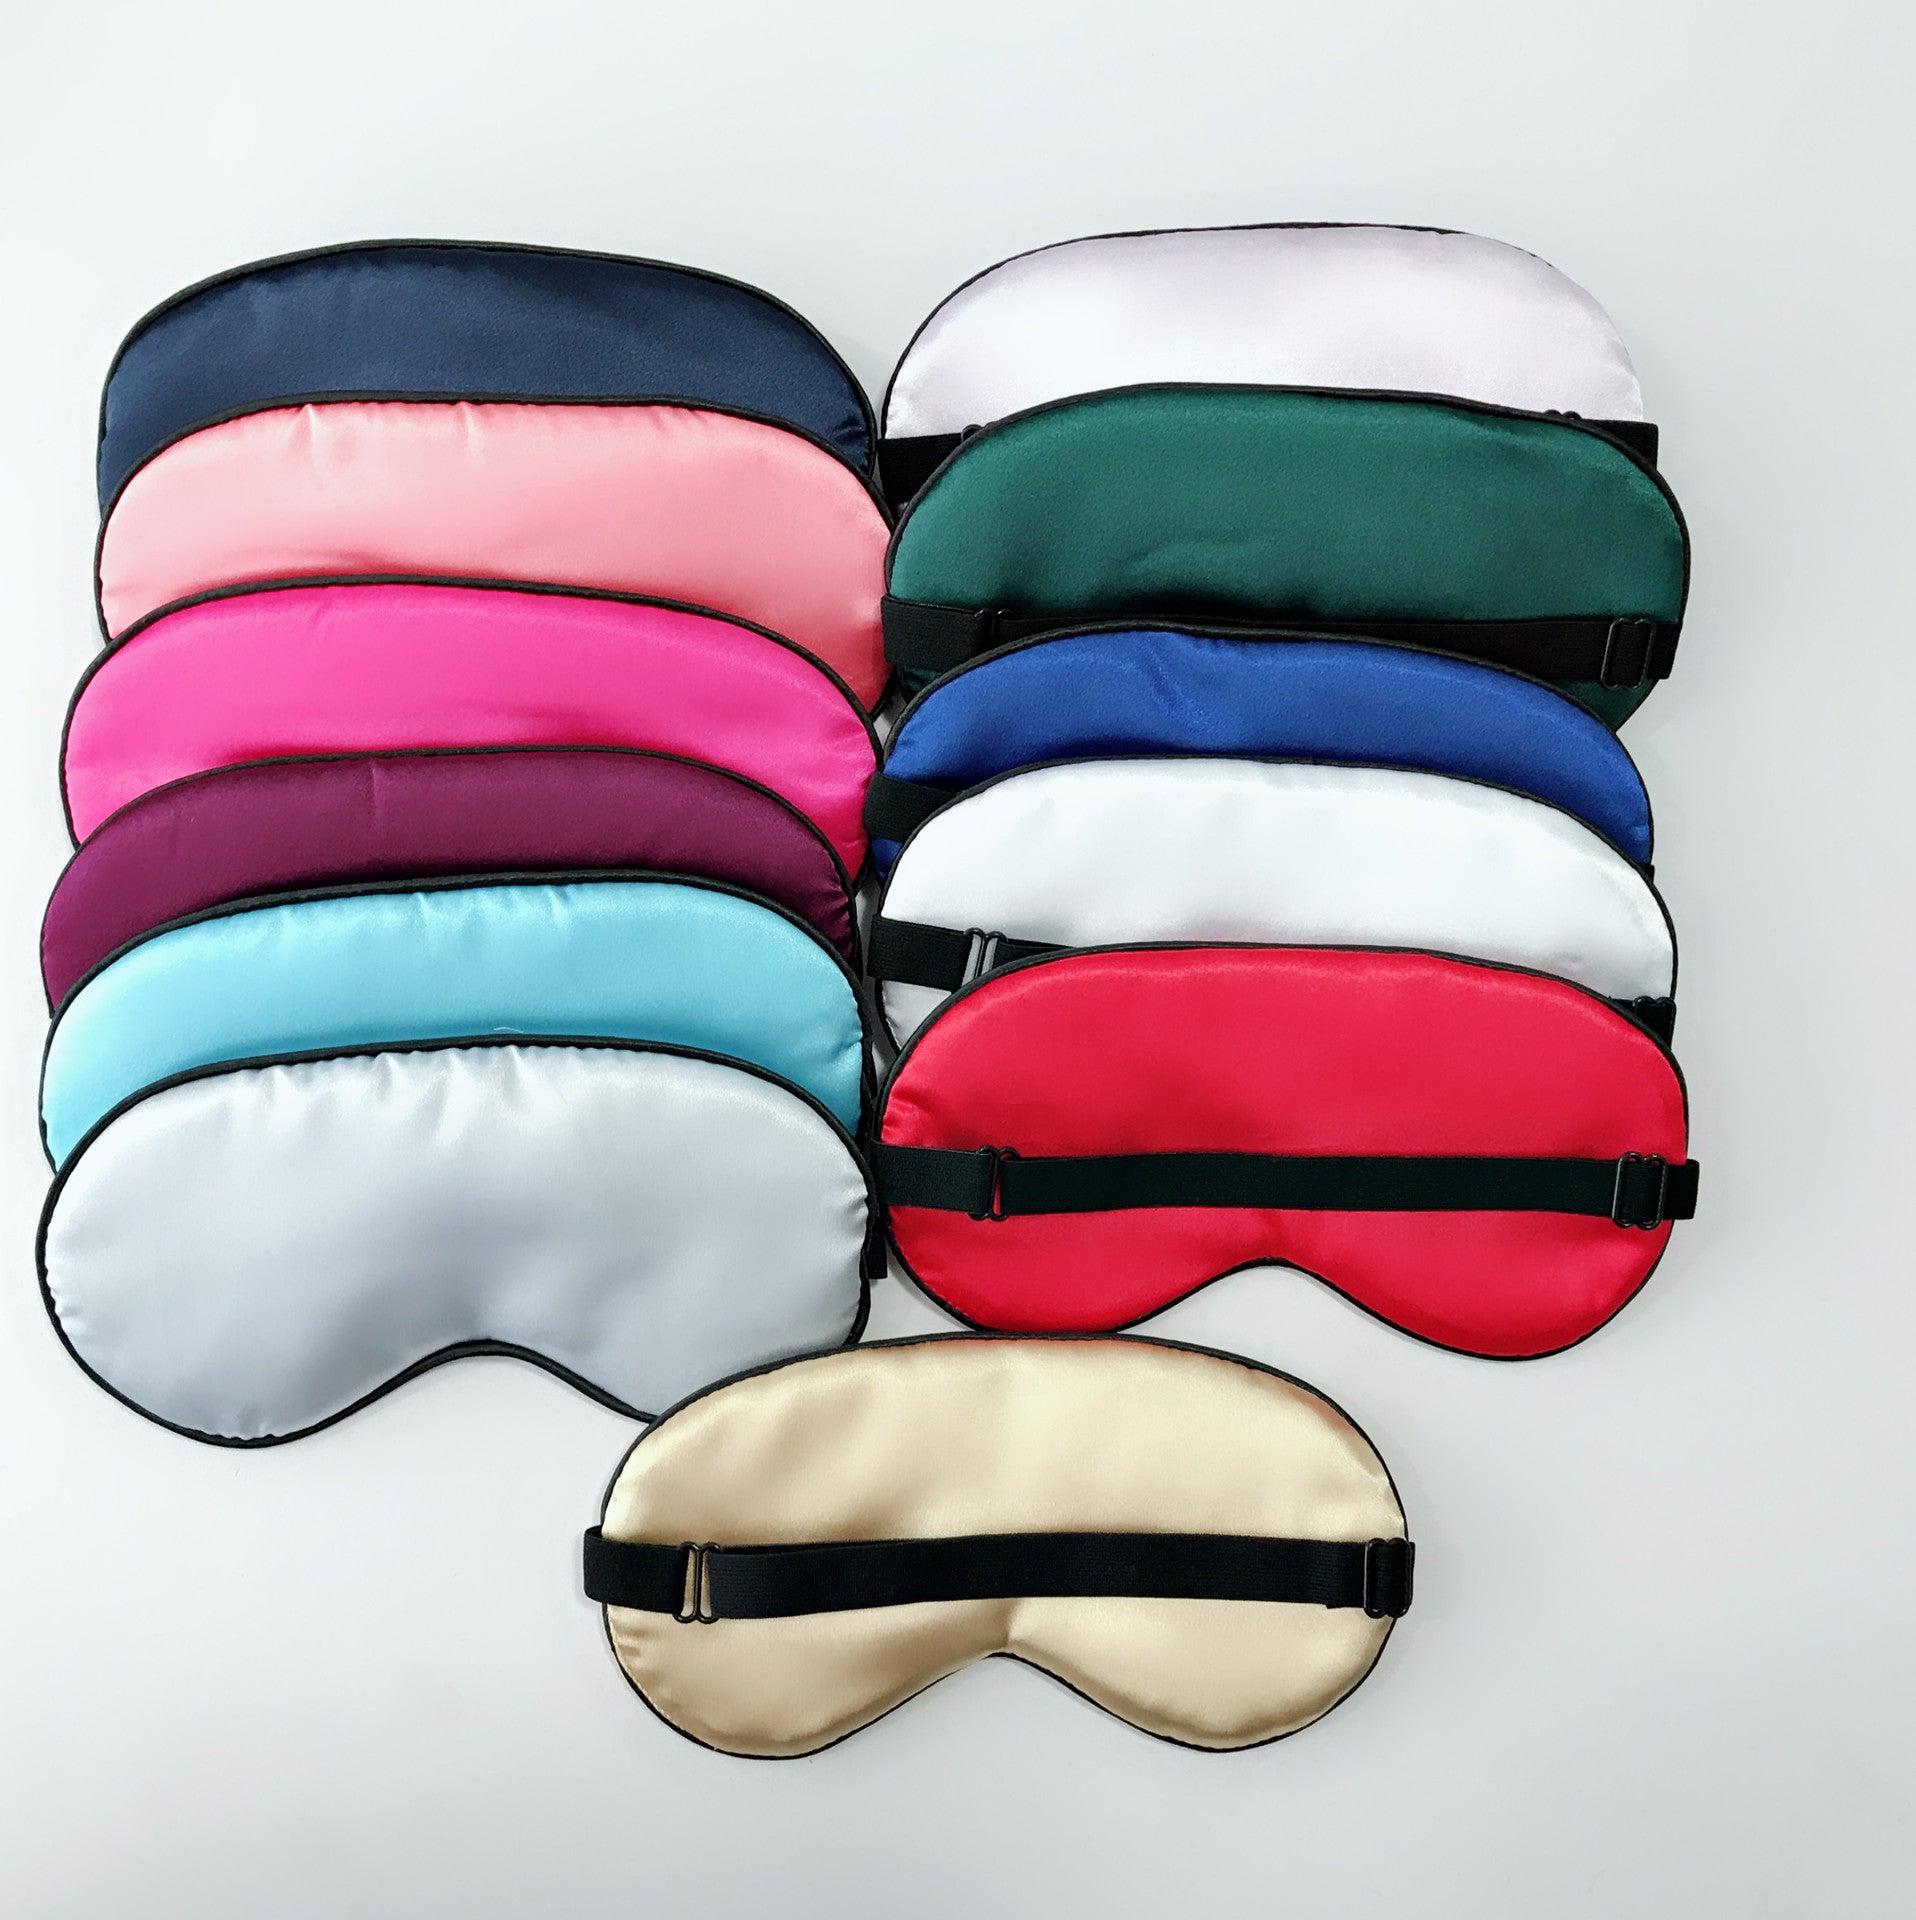 1PC Safety Goggles Pure Silk Sleep Eye Mask Padded Shade Cover Travel Relax Aid Blindfold New